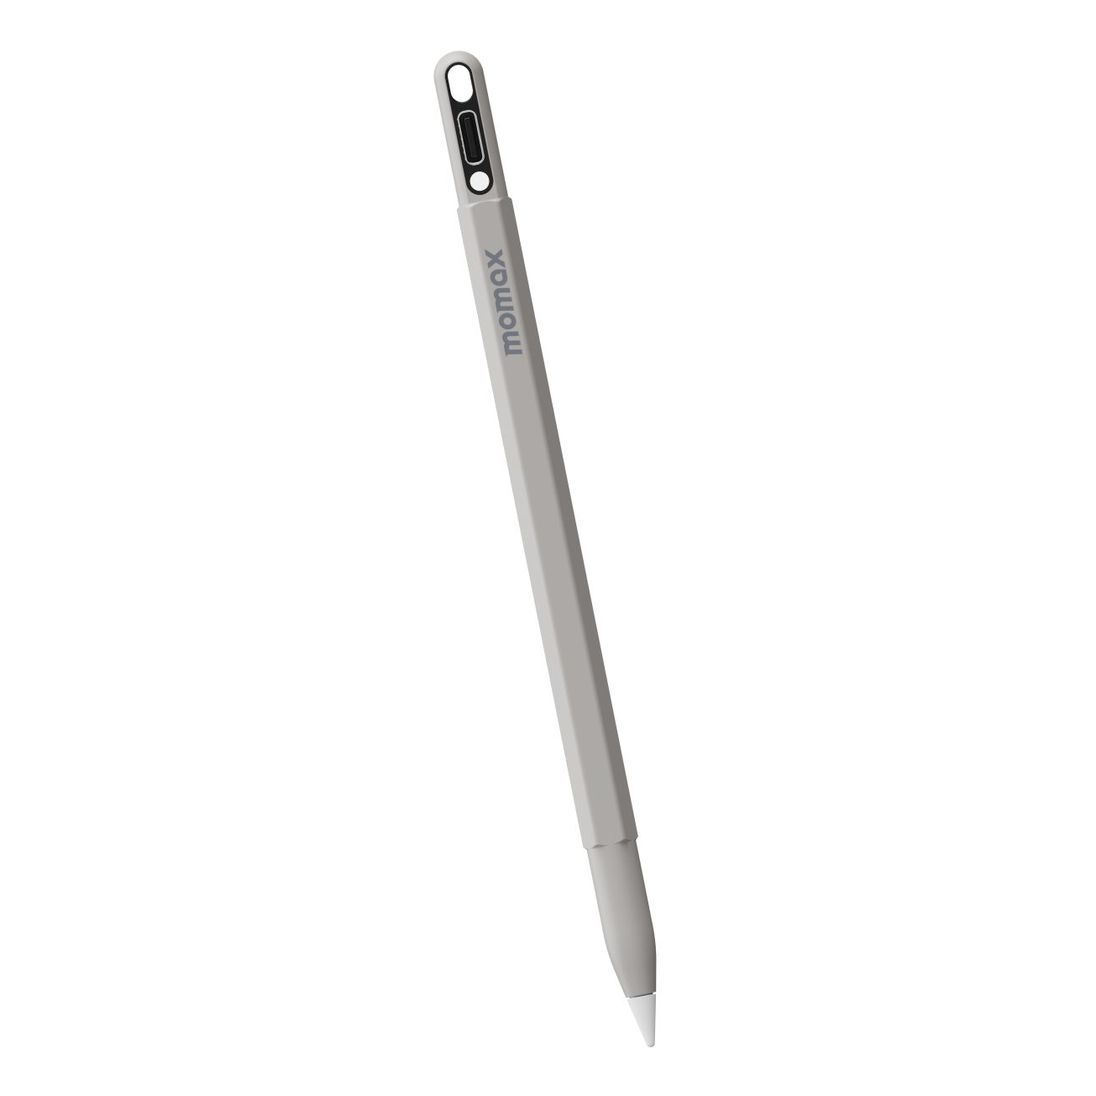 Momax Mag.Link Pop Magnetic Active Stylus Pen - Grey